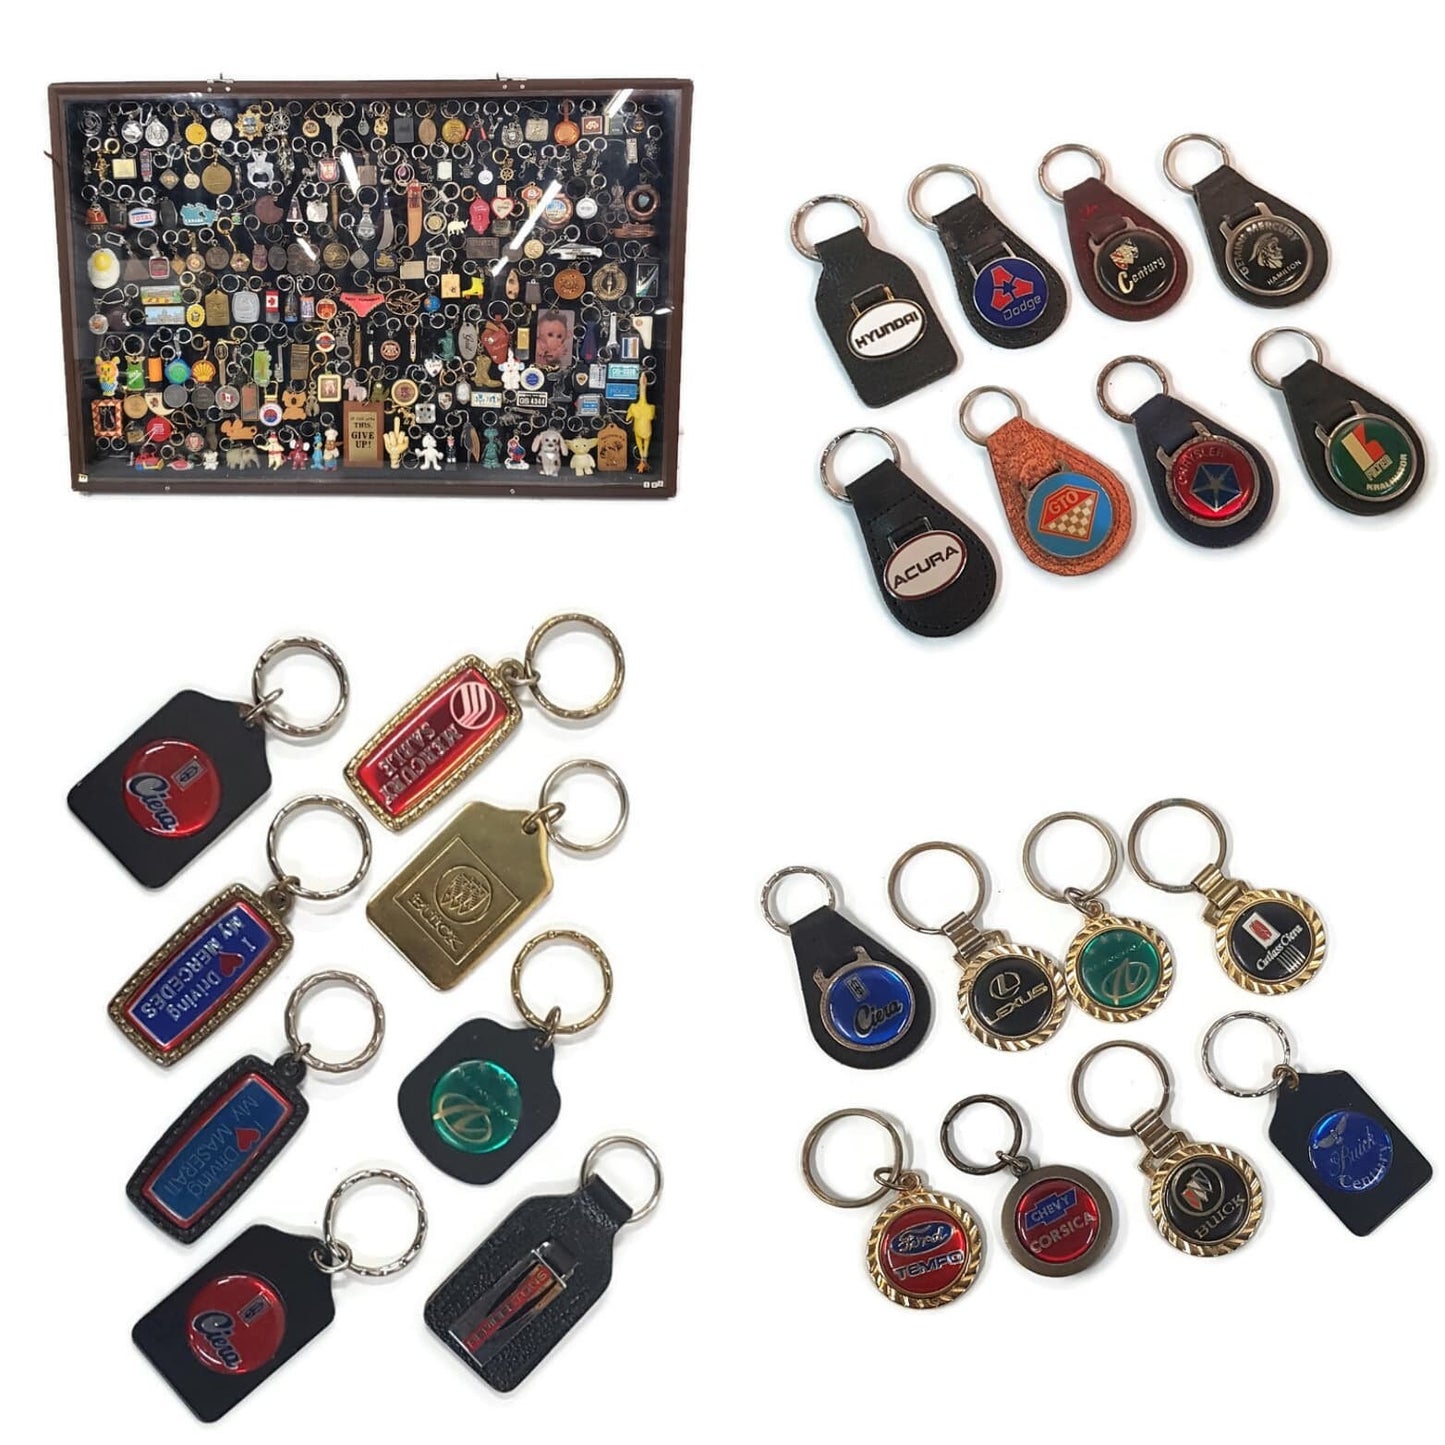 willys key chain keychain key fob keytag vintage automotove keychain gift collectible